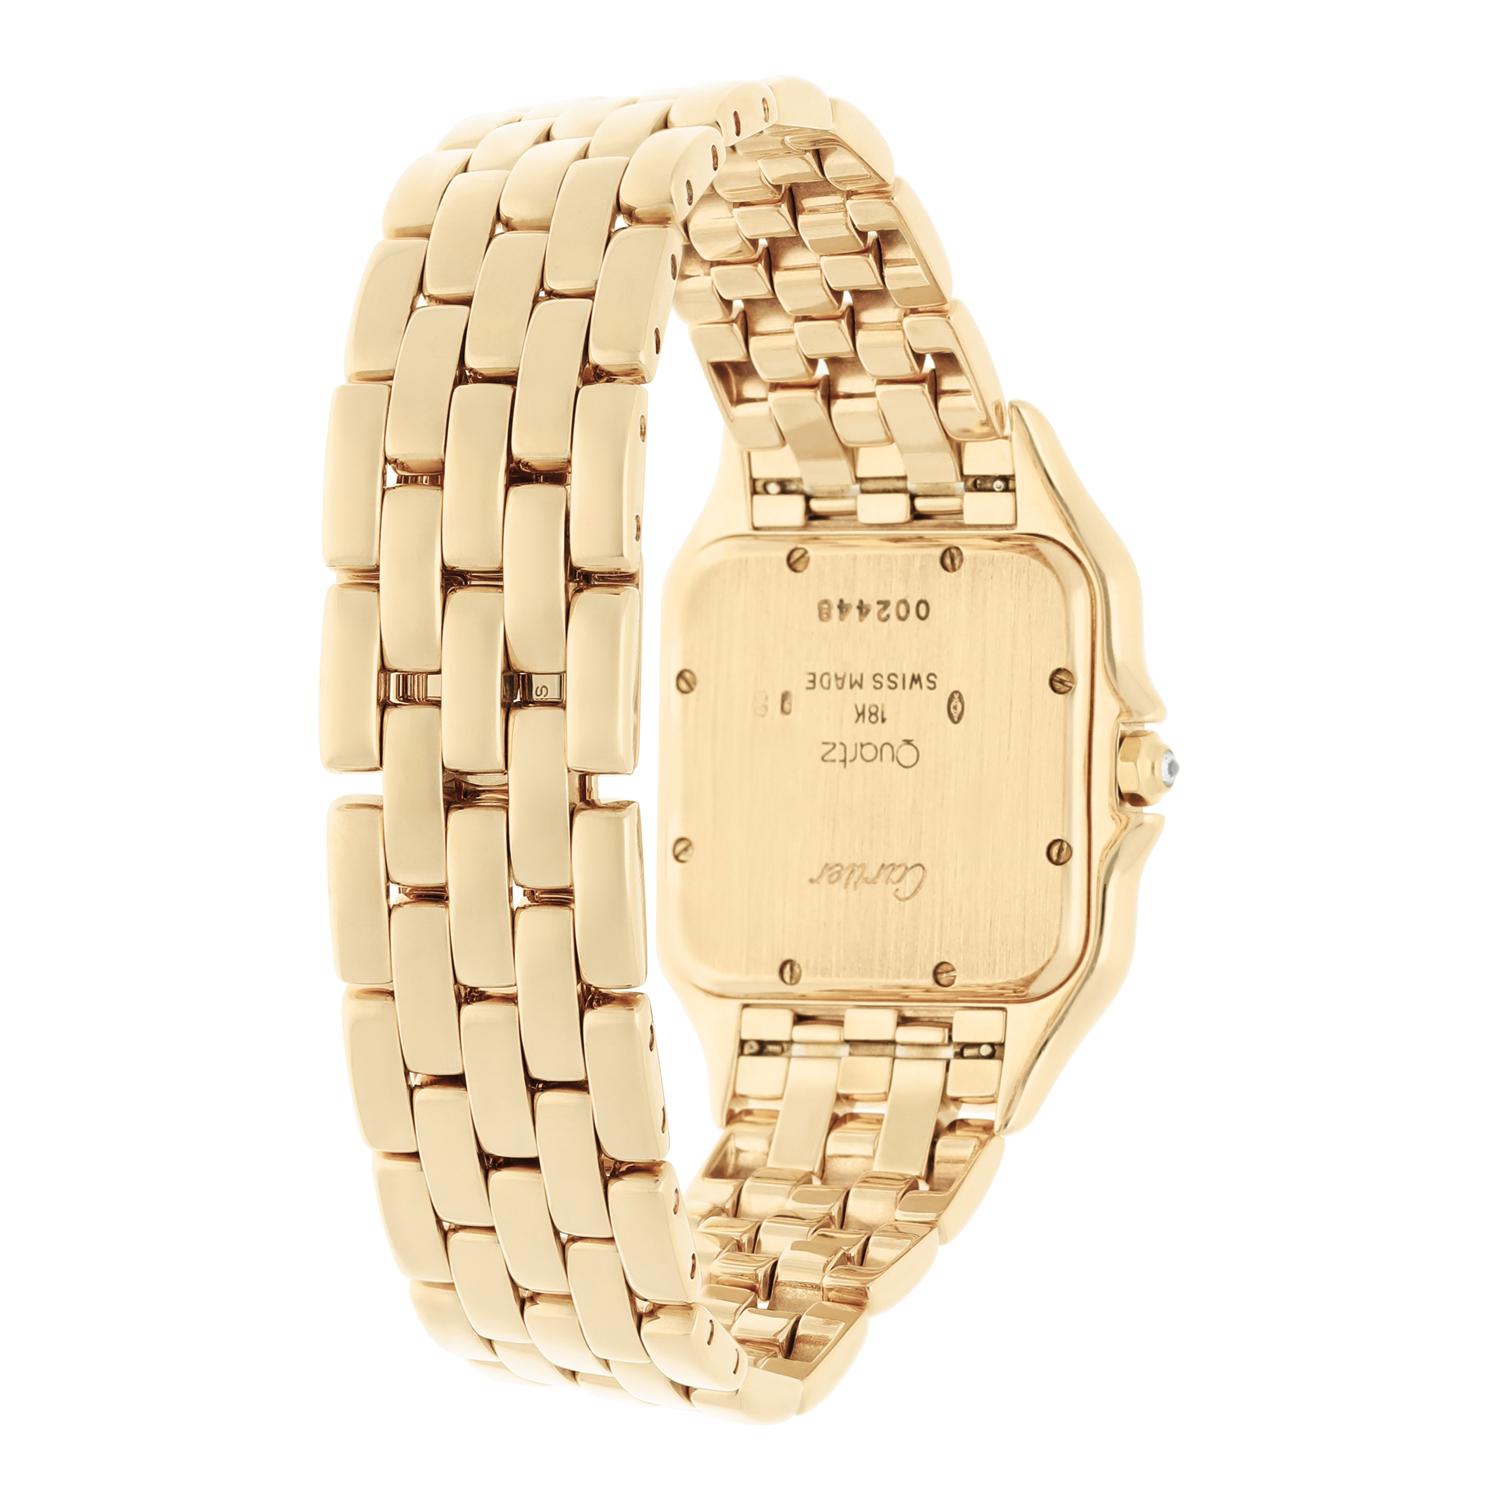 Cartier Panthere 29mm Ladies Large 18K Yellow Gold Watch with Diamonds 887968 2